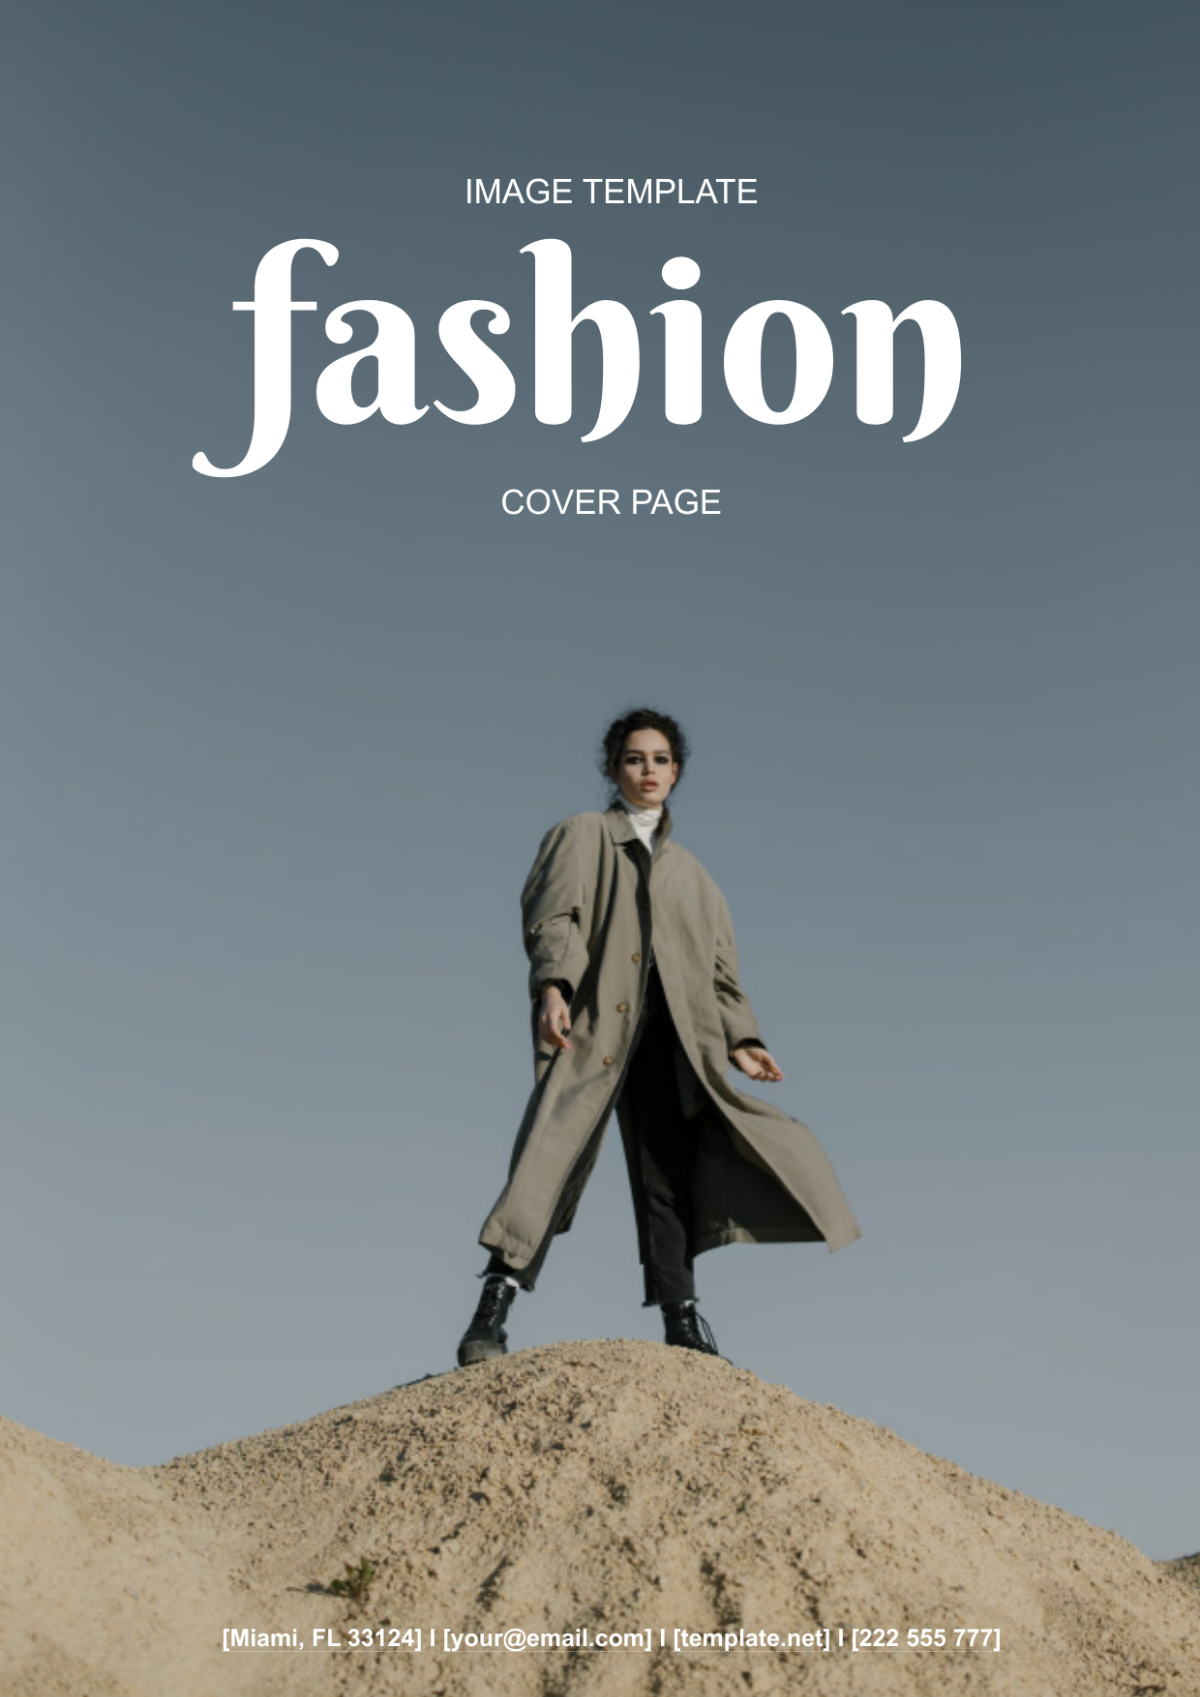 Free Fashion Cover Page Image Template